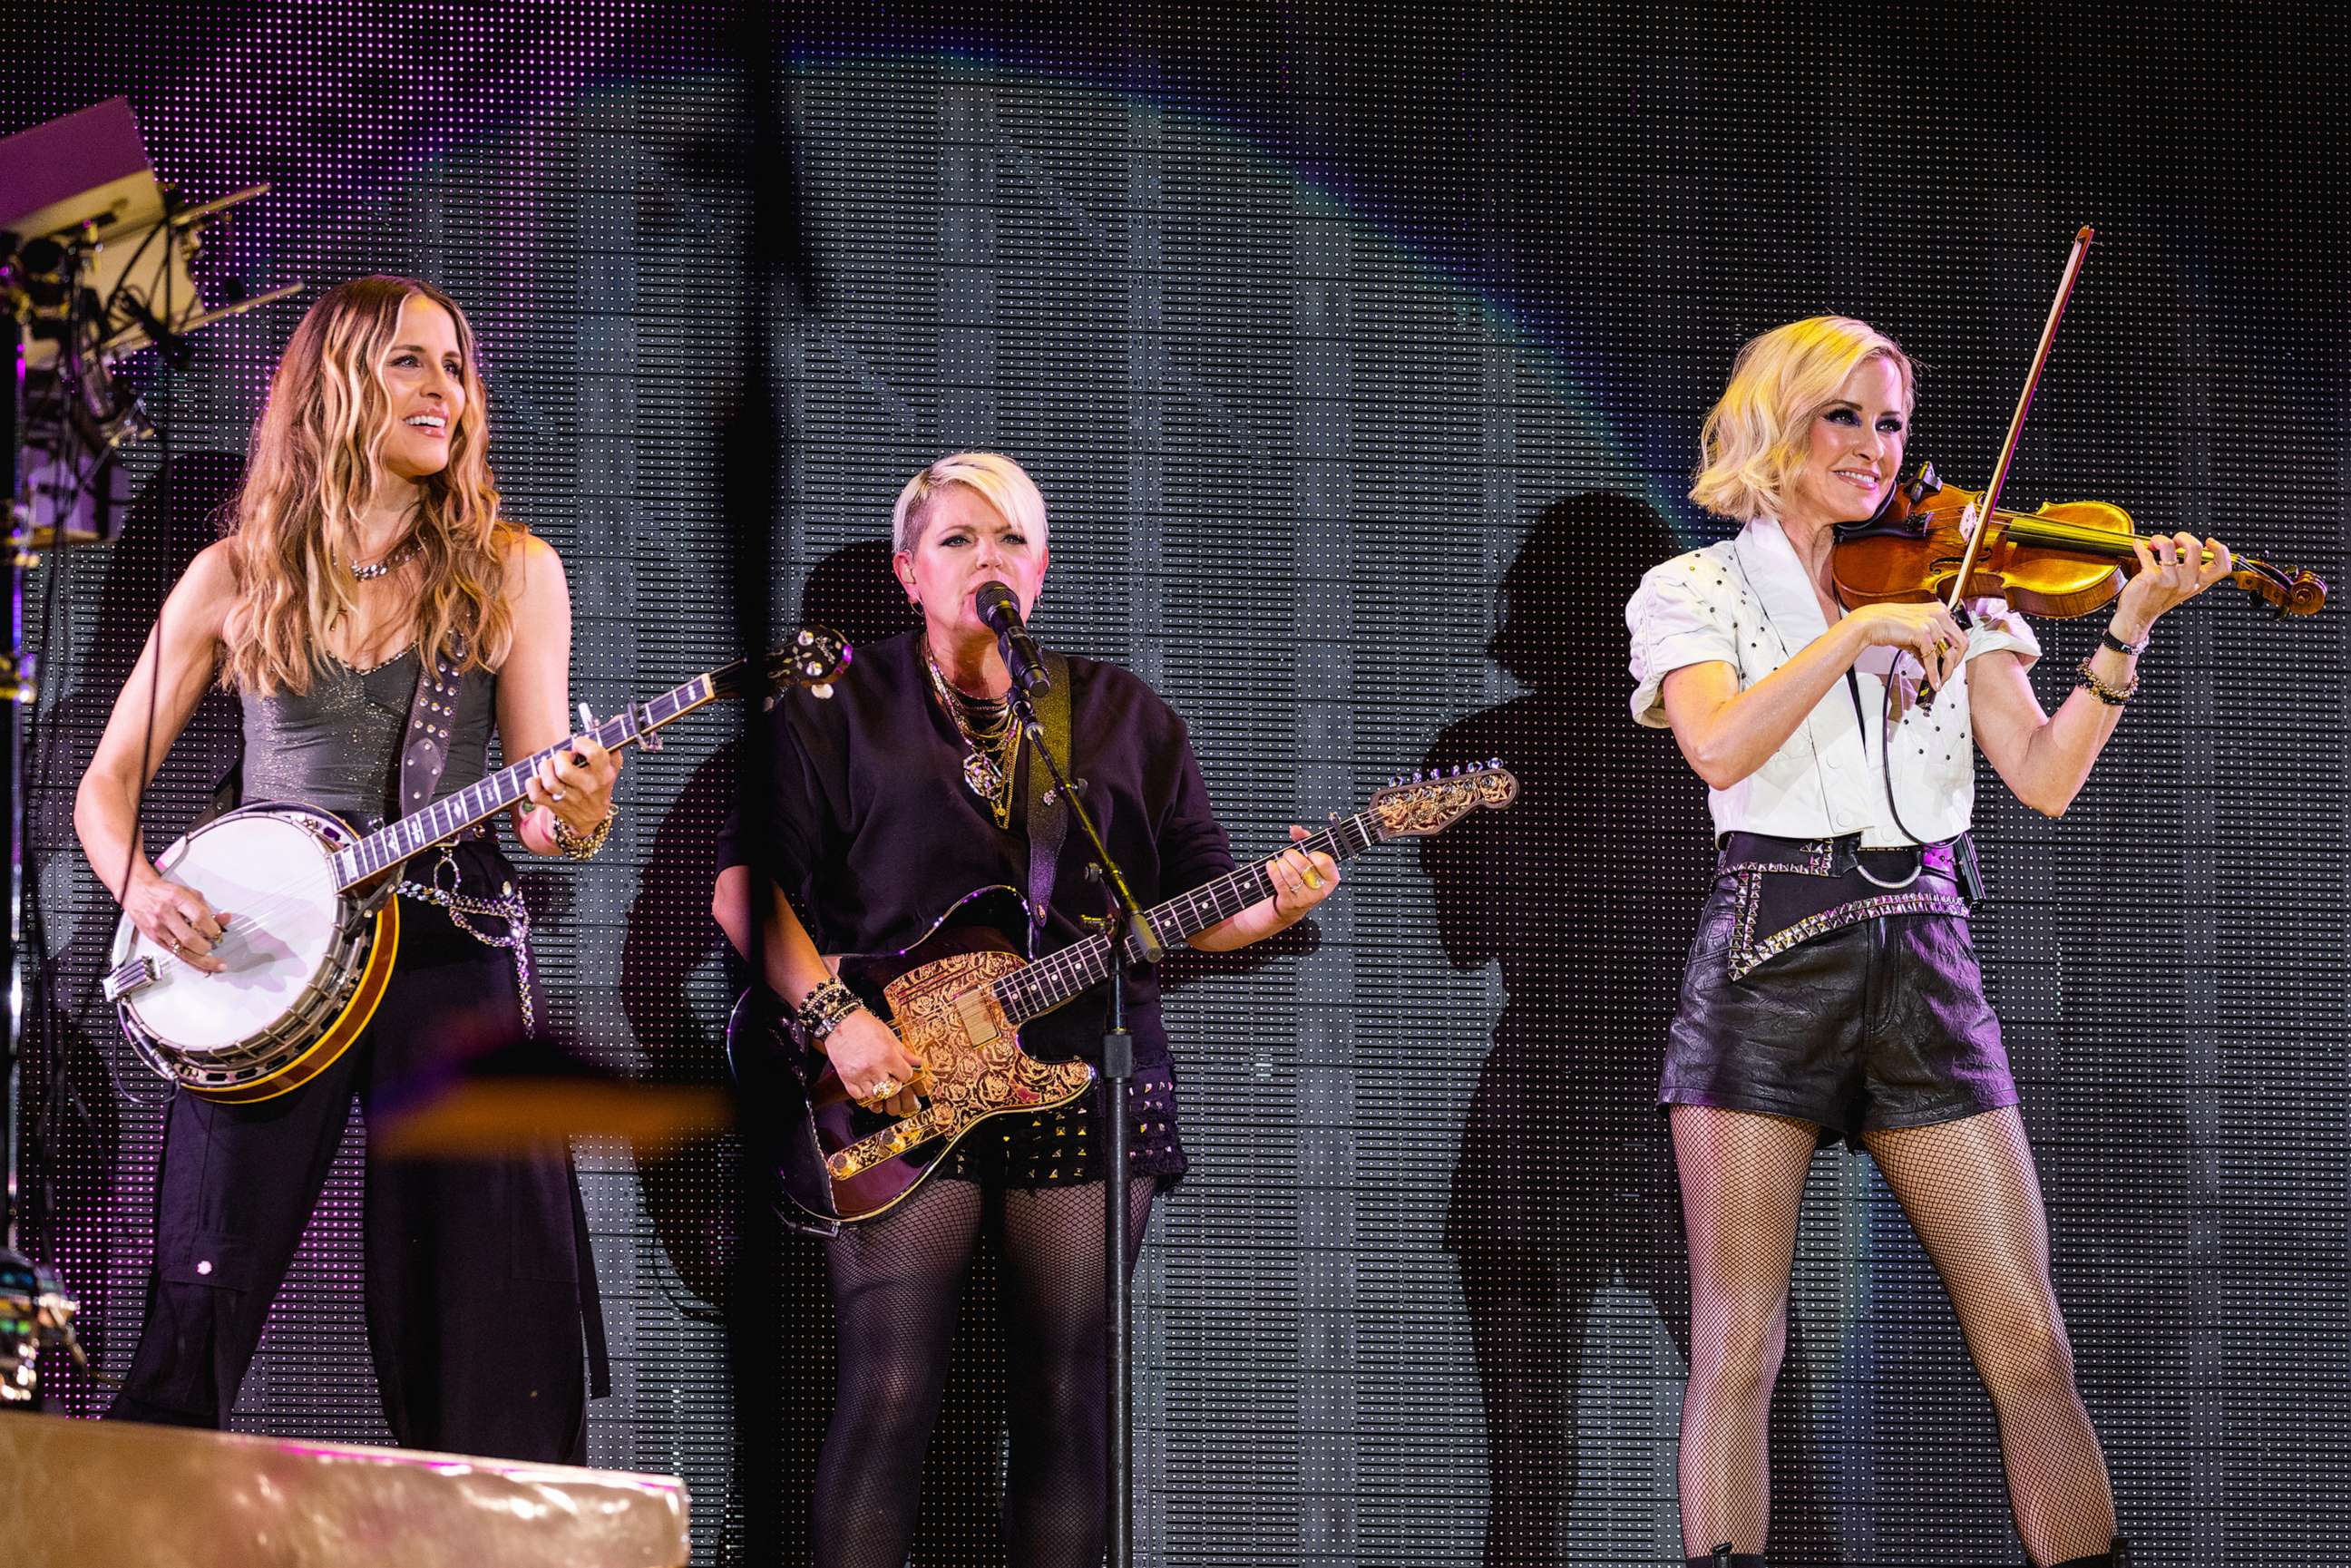 PHOTO: Emily Strayer, Natalie Maines, and Martie Maguire of The Chicks perform onstage during weekend two, day one of Austin City Limits Music Festival, Oct. 14, 2022,in Austin, Texas.